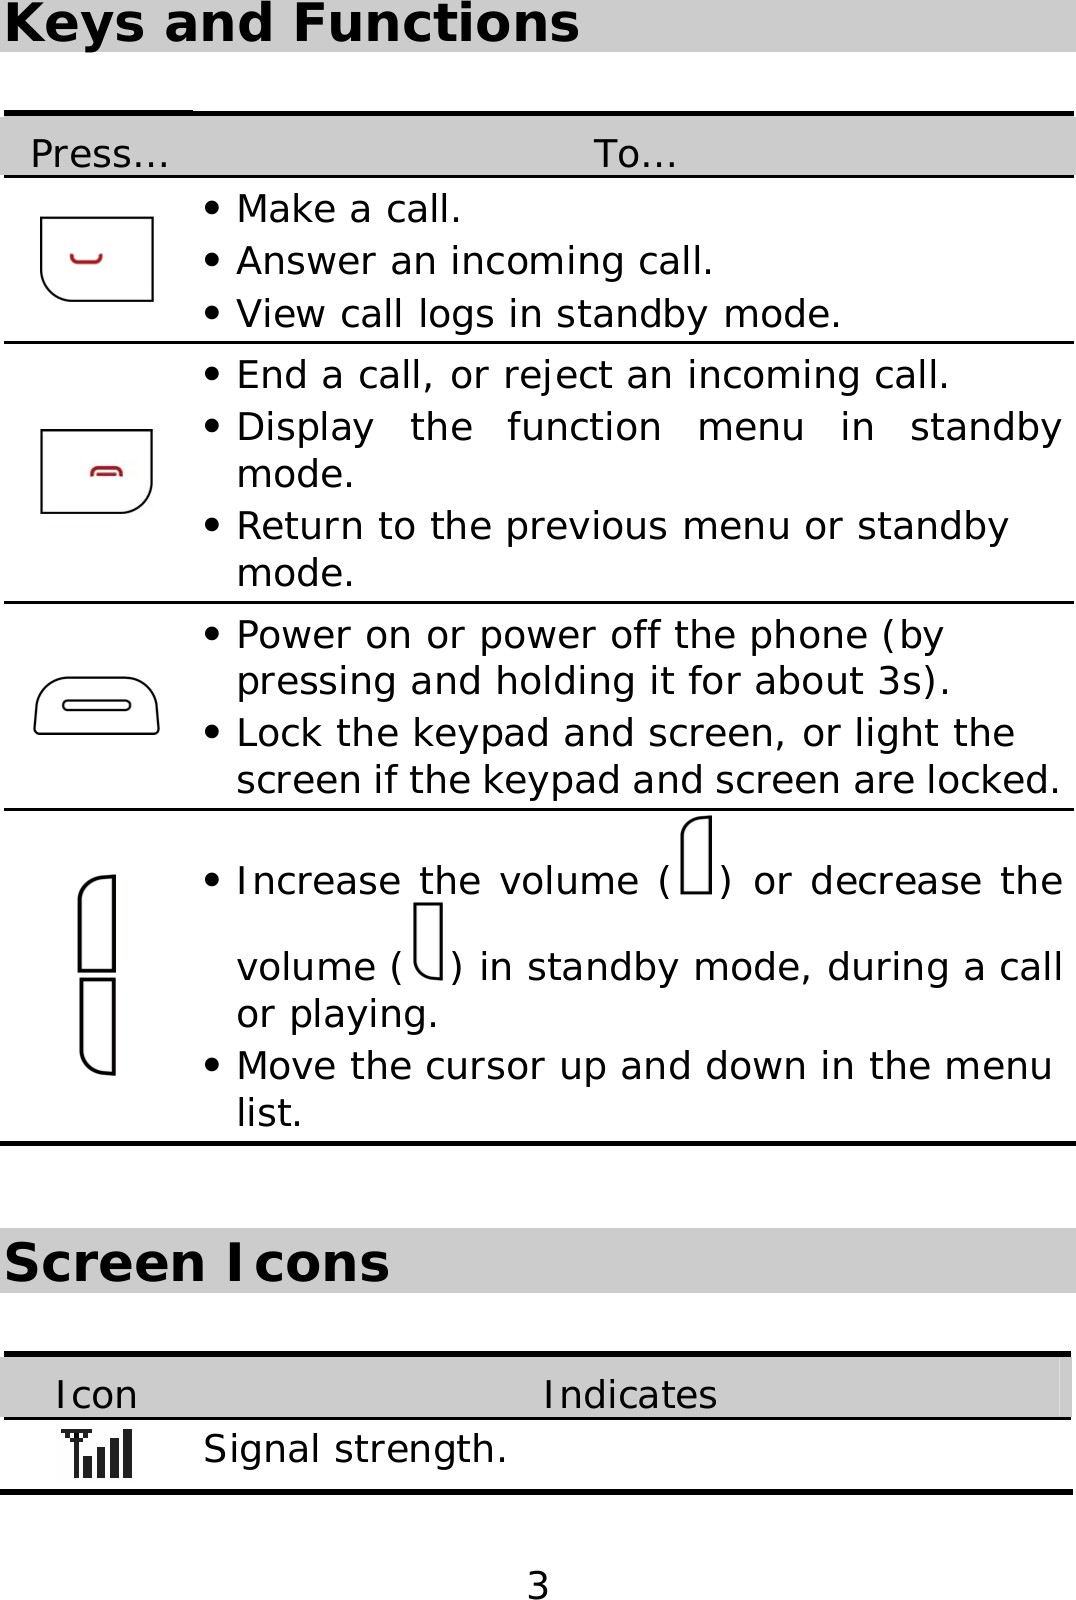 3 Keys and Functions  Press…  To…  z Make a call. z Answer an incoming call. z View call logs in standby mode.  z End a call, or reject an incoming call. z Display the function menu in standby mode. z Return to the previous menu or standby mode.  z Power on or power off the phone (by pressing and holding it for about 3s). z Lock the keypad and screen, or light the screen if the keypad and screen are locked.   z Increase the volume ( ) or decrease the volume ( ) in standby mode, during a call or playing.  z Move the cursor up and down in the menu list.  Screen Icons  Icon  Indicates  Signal strength. 